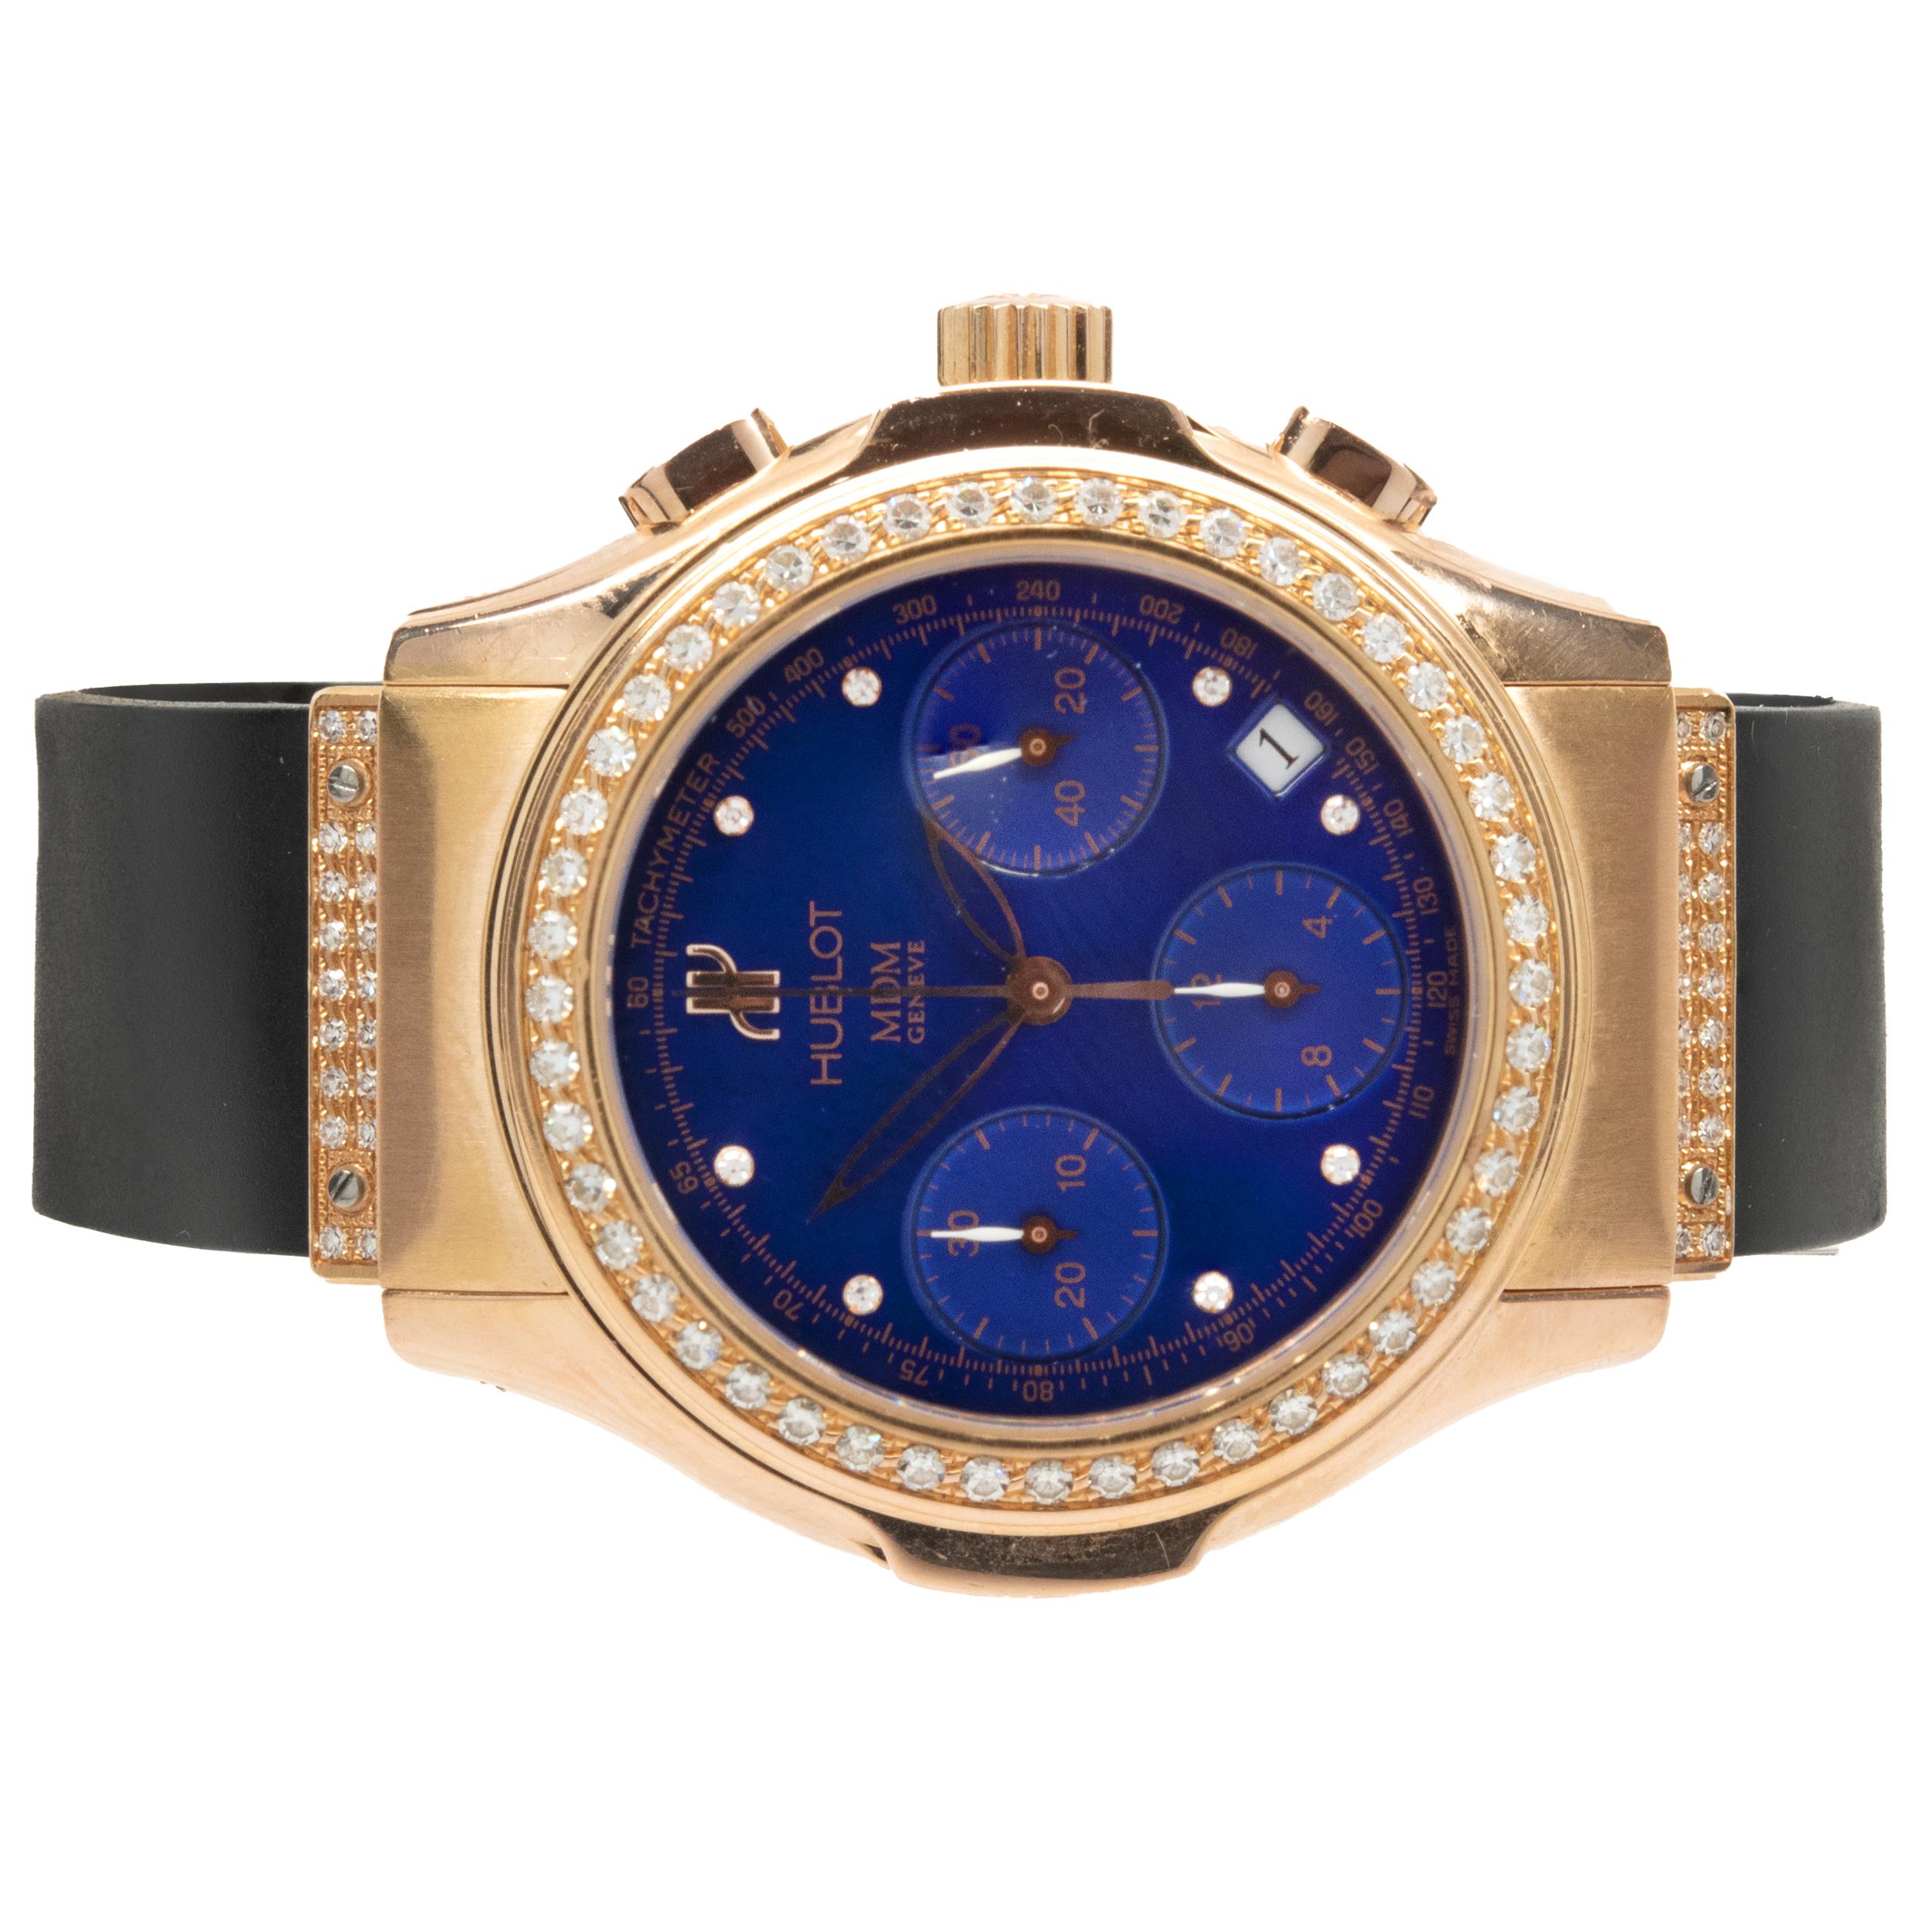 Movement: automatic
Function: hours, minutes, seconds, date, chronograph
Case: 40mm 18K rose gold round case, diamond bezel
Band: black rubber Hublot strap with deployment clasp
Dial: electric blue sunburst
Reference #:  MDM 1810.810.3.054
Serial #: